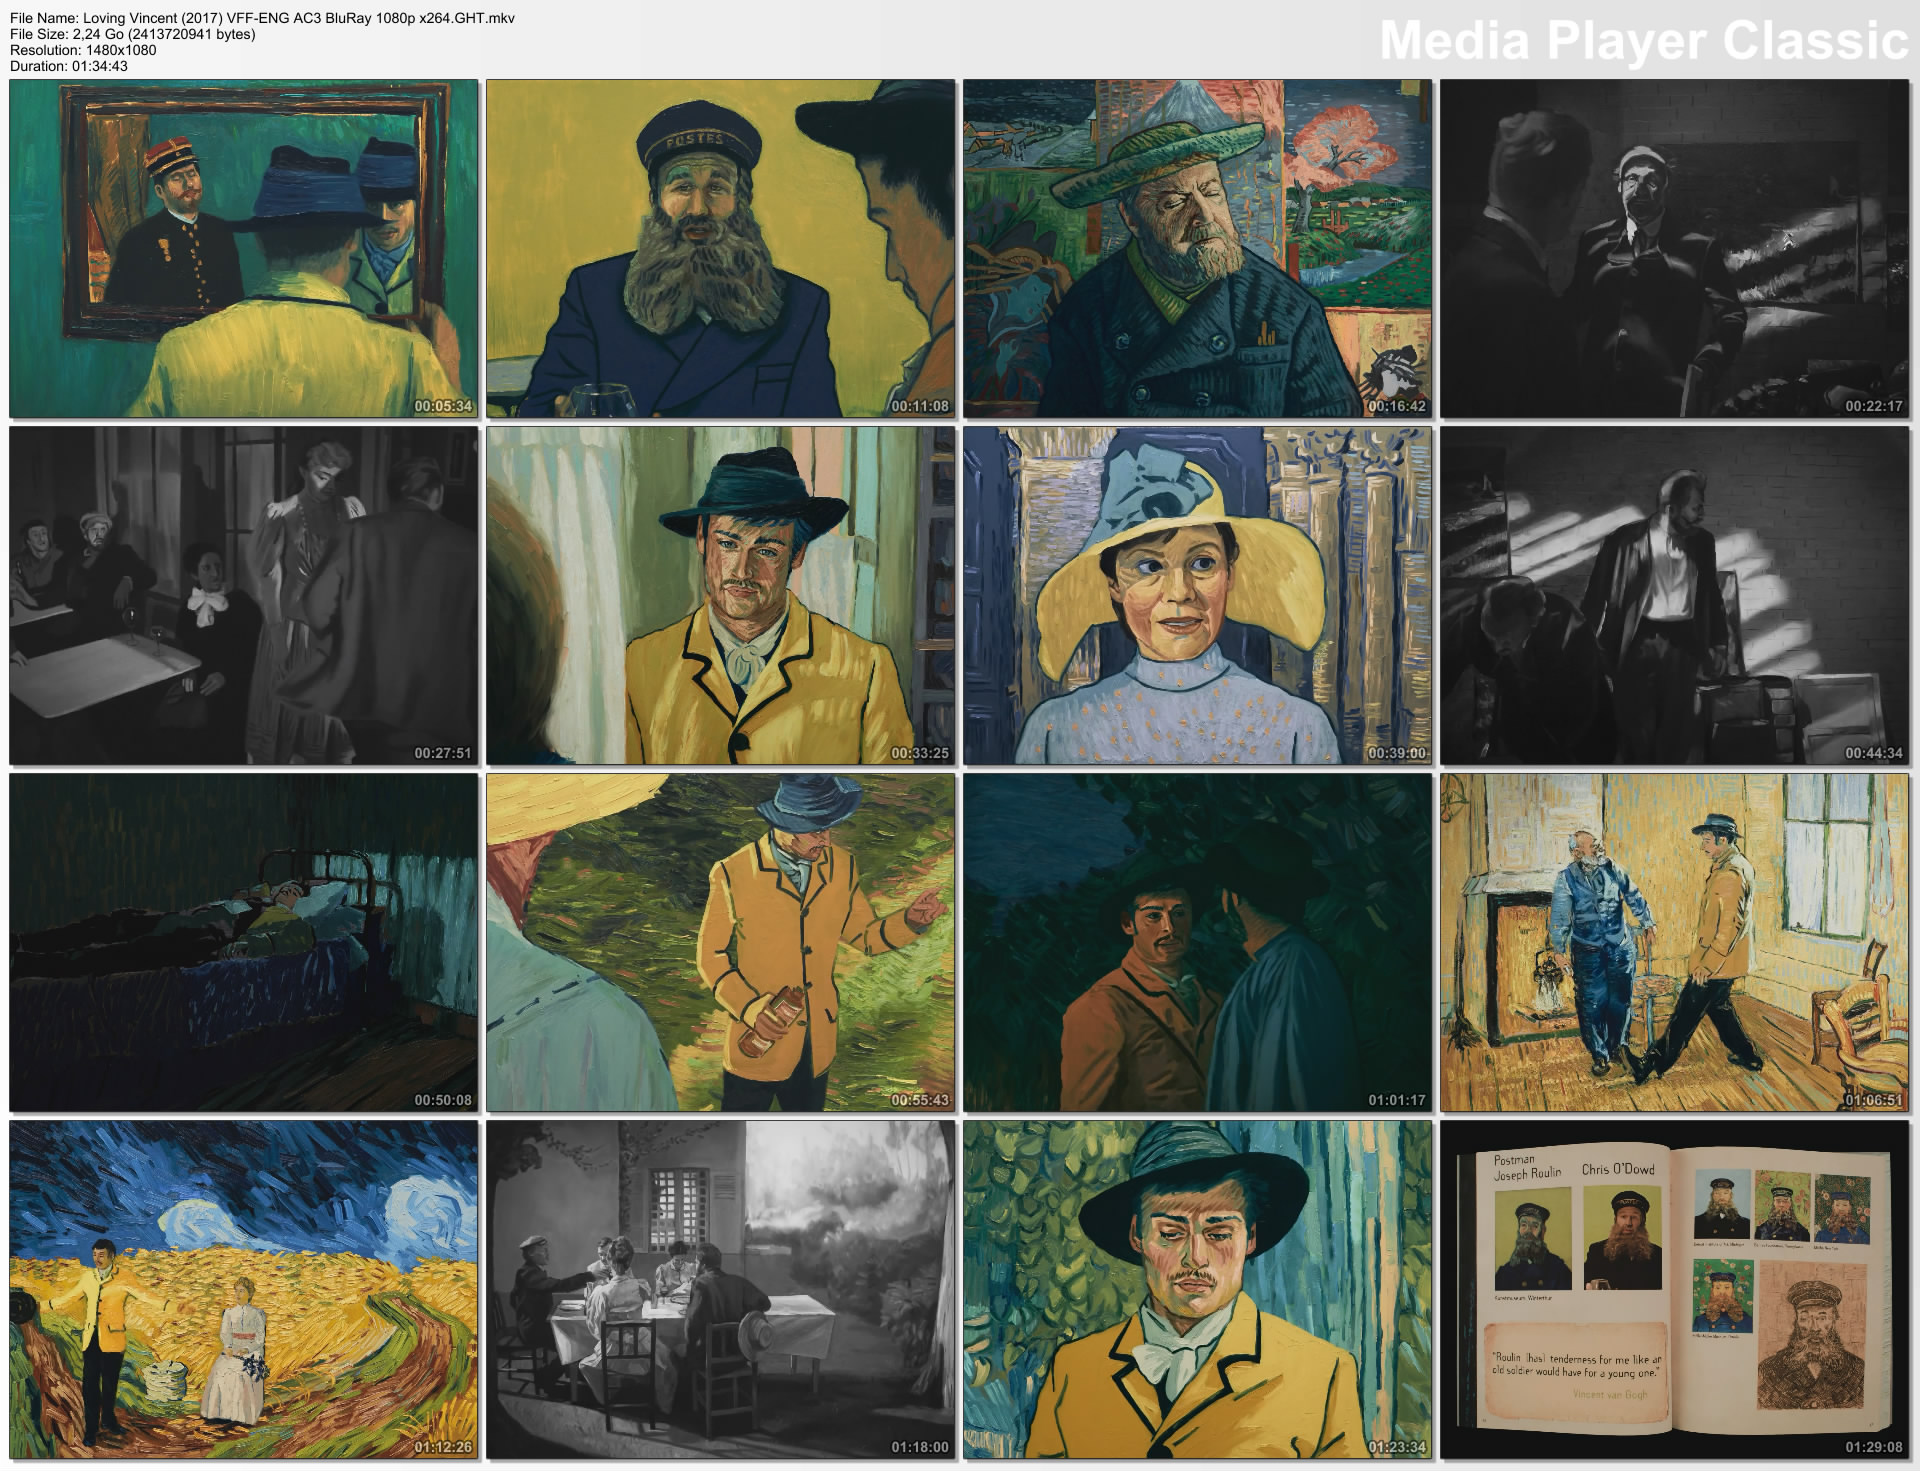 Loving Vincent (2017) VFF-ENG AC3 BluRay 1080p x264.GHT